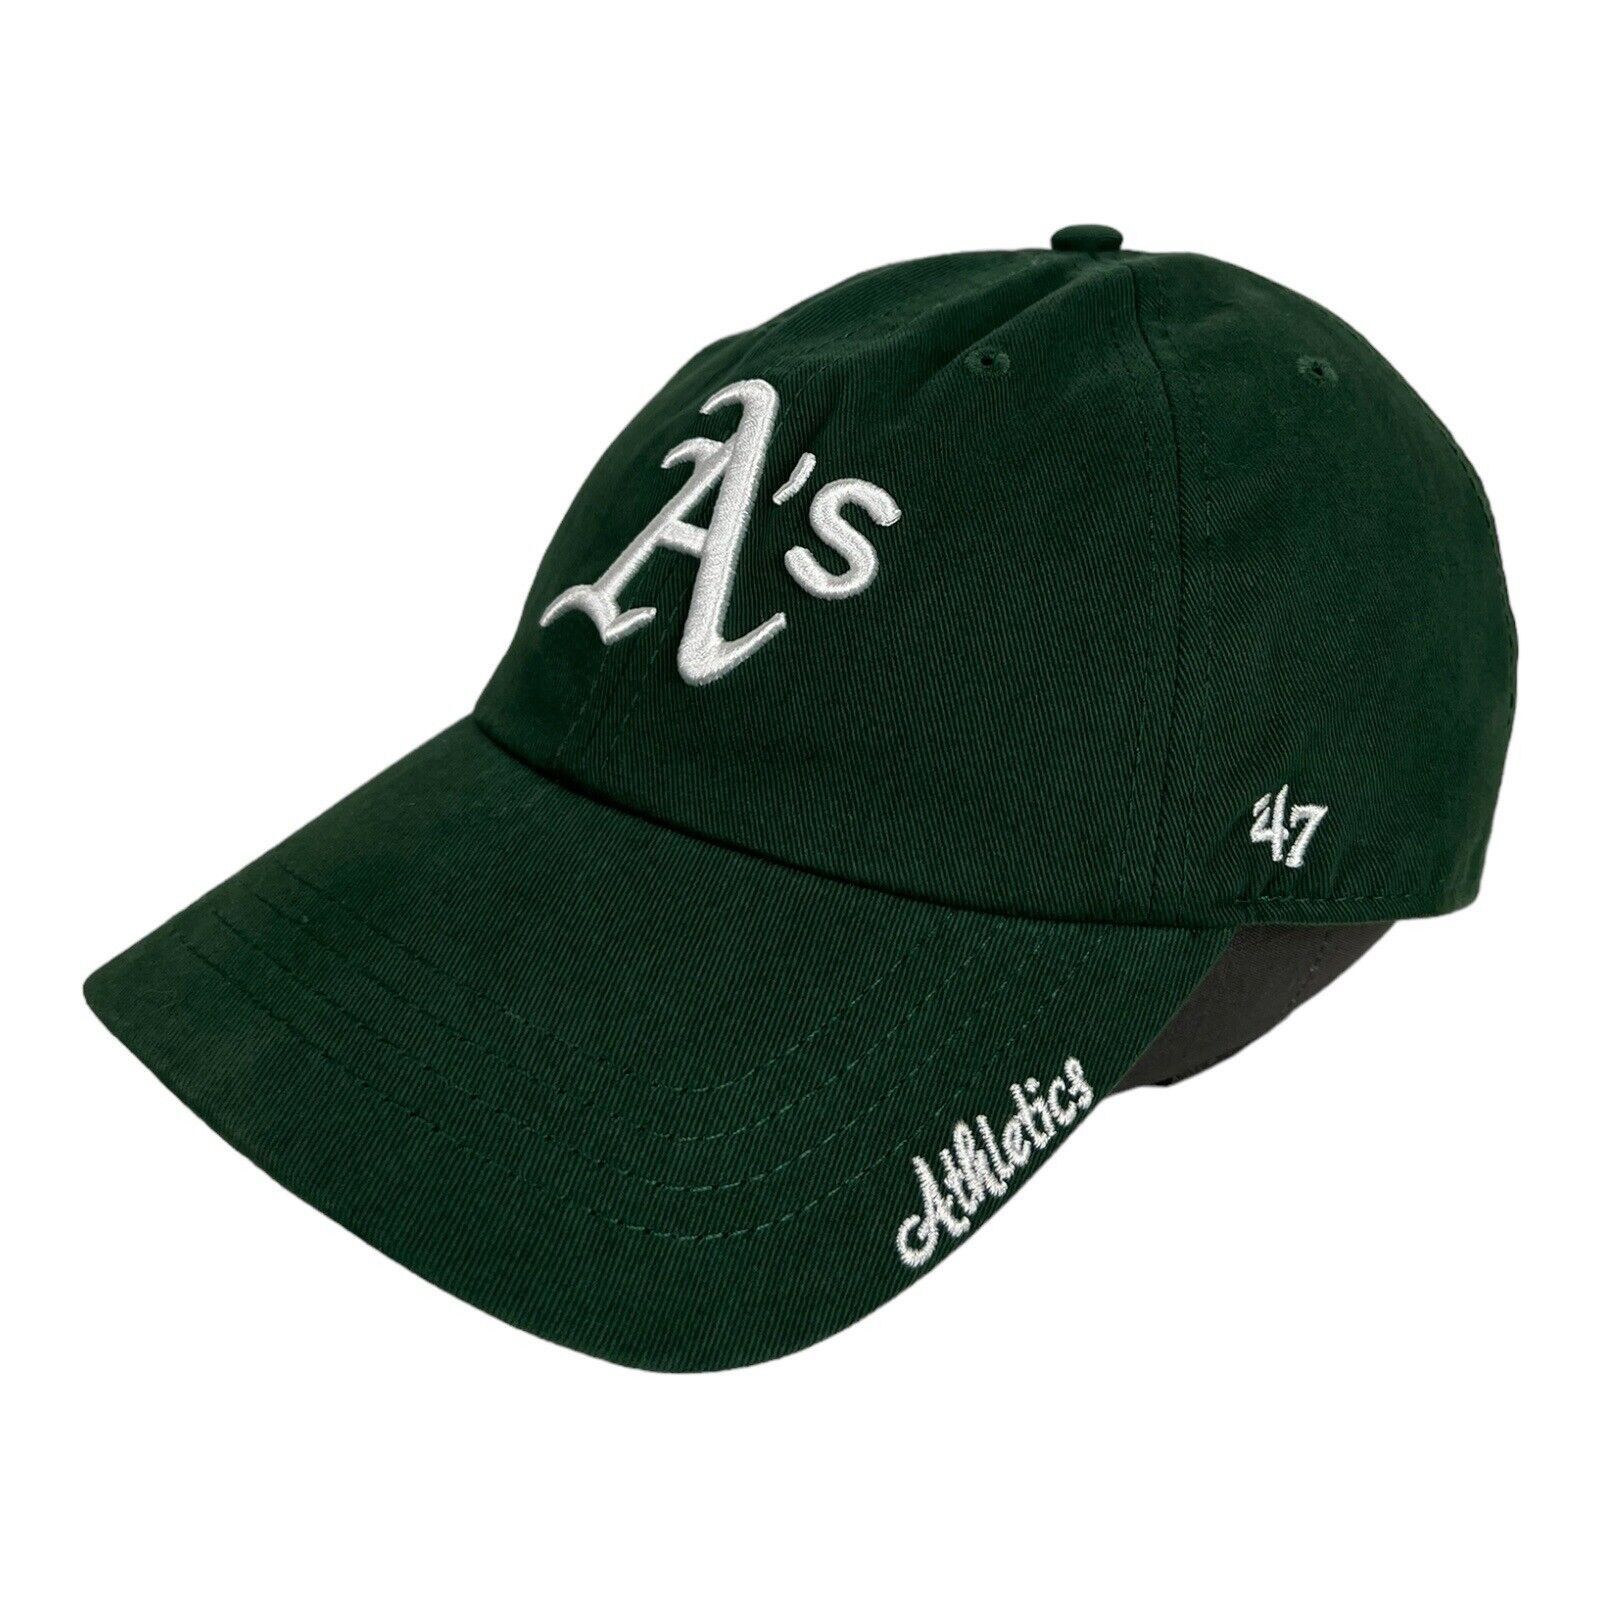 47 Brand Oakland Athletics Strapback Hat Cap Women’s By 47 Brand Gree Size ONE SIZE - 1 Preview